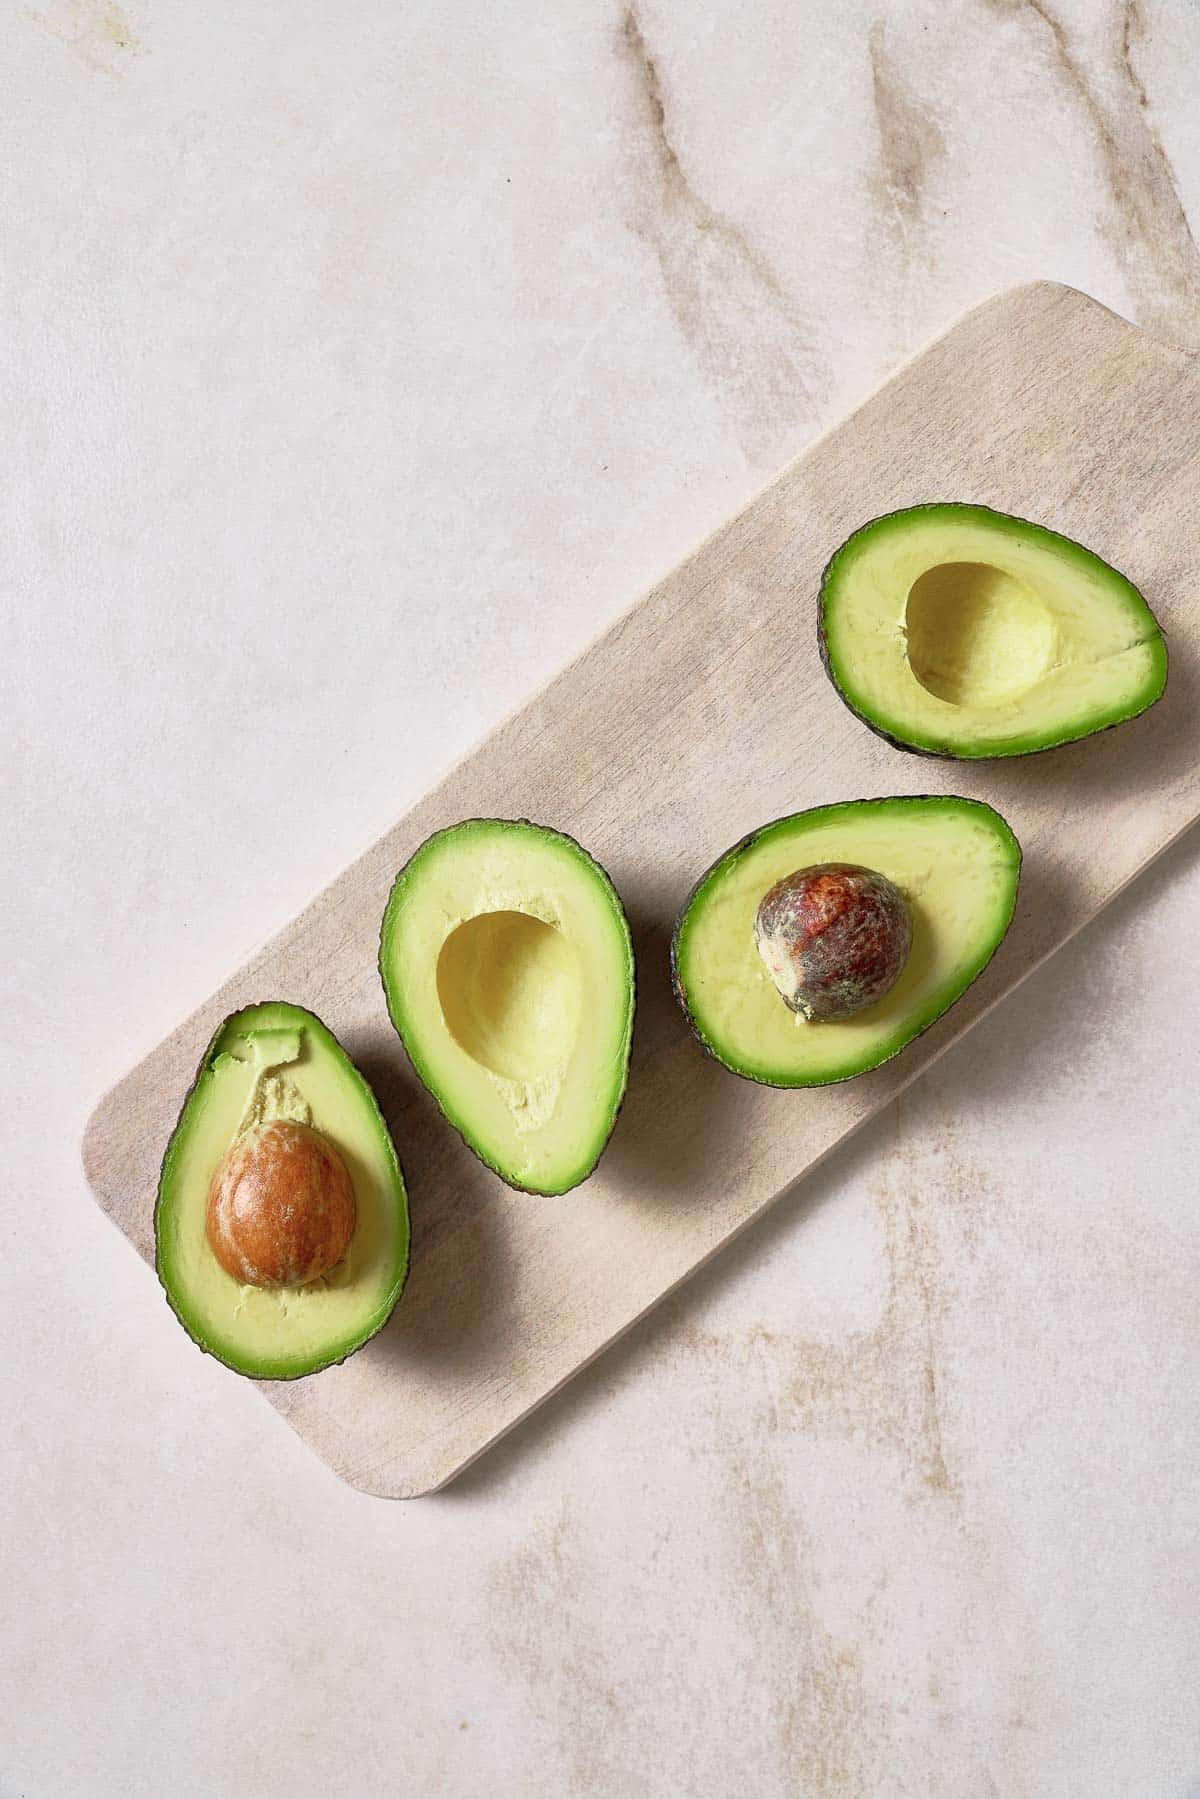 Four avocados on a wooden cutting board.